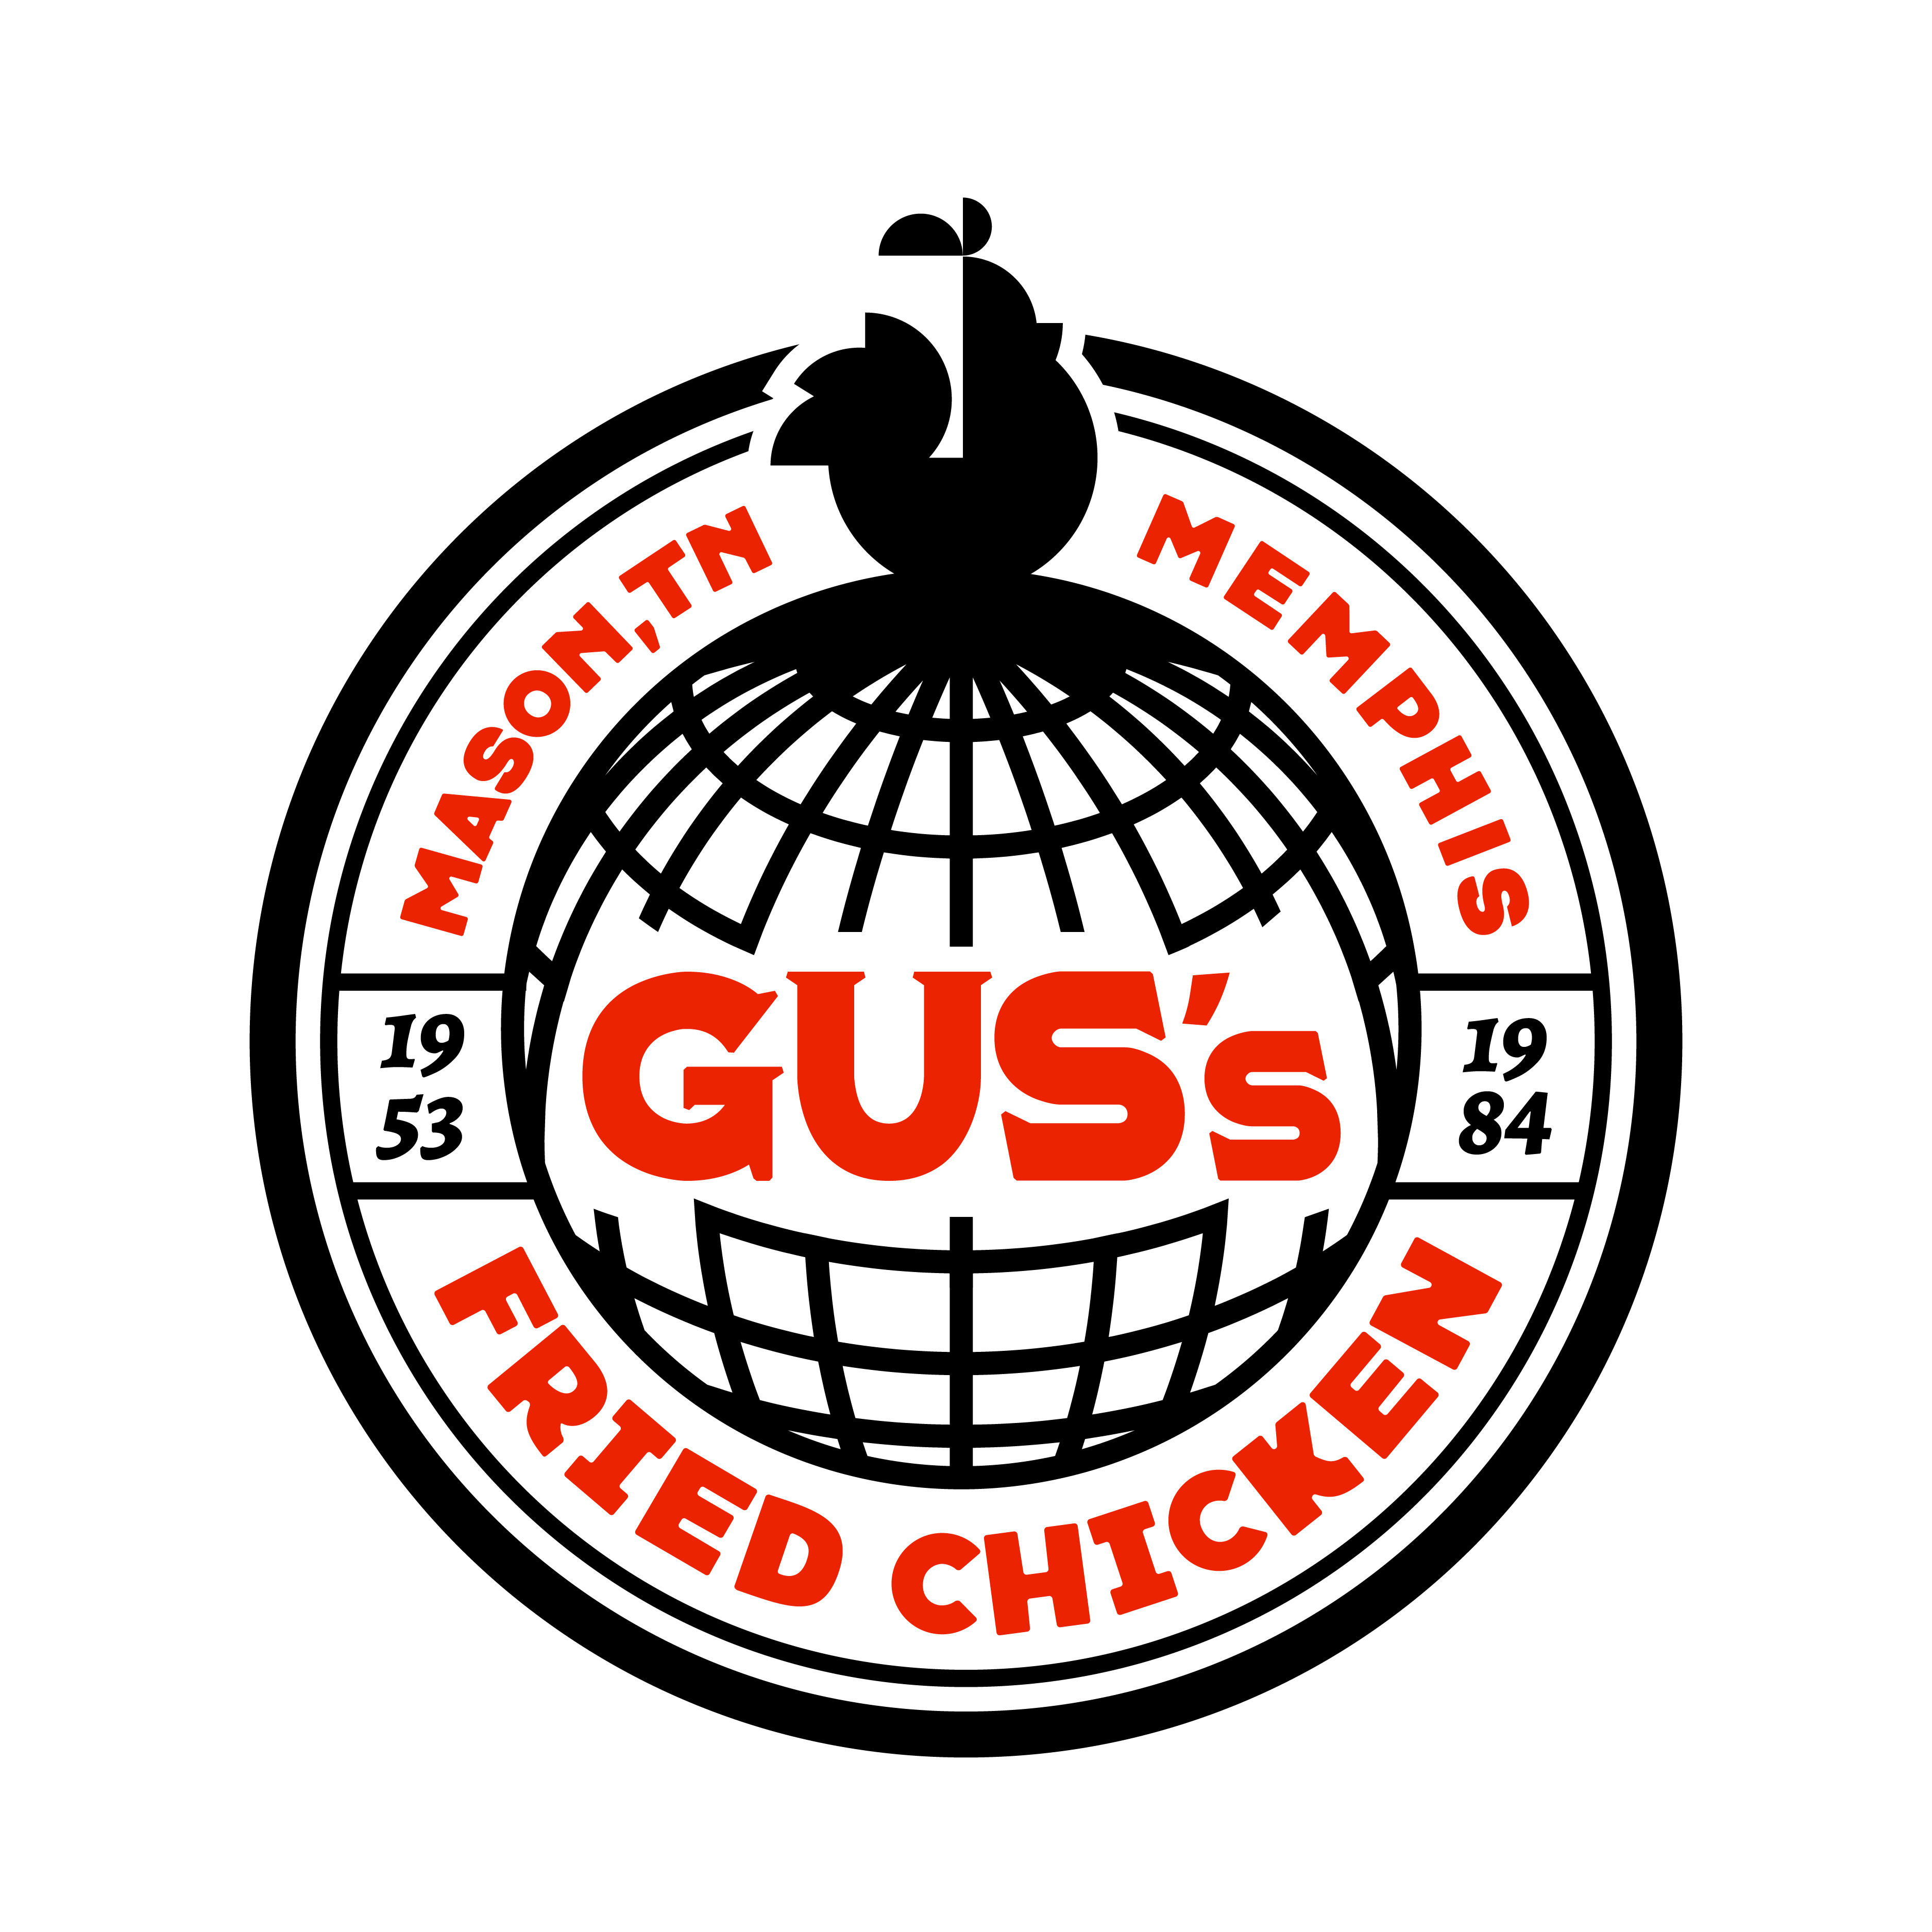 Gus's Fried Chicken Badge logo design by logo designer Overturf Design Studio for your inspiration and for the worlds largest logo competition